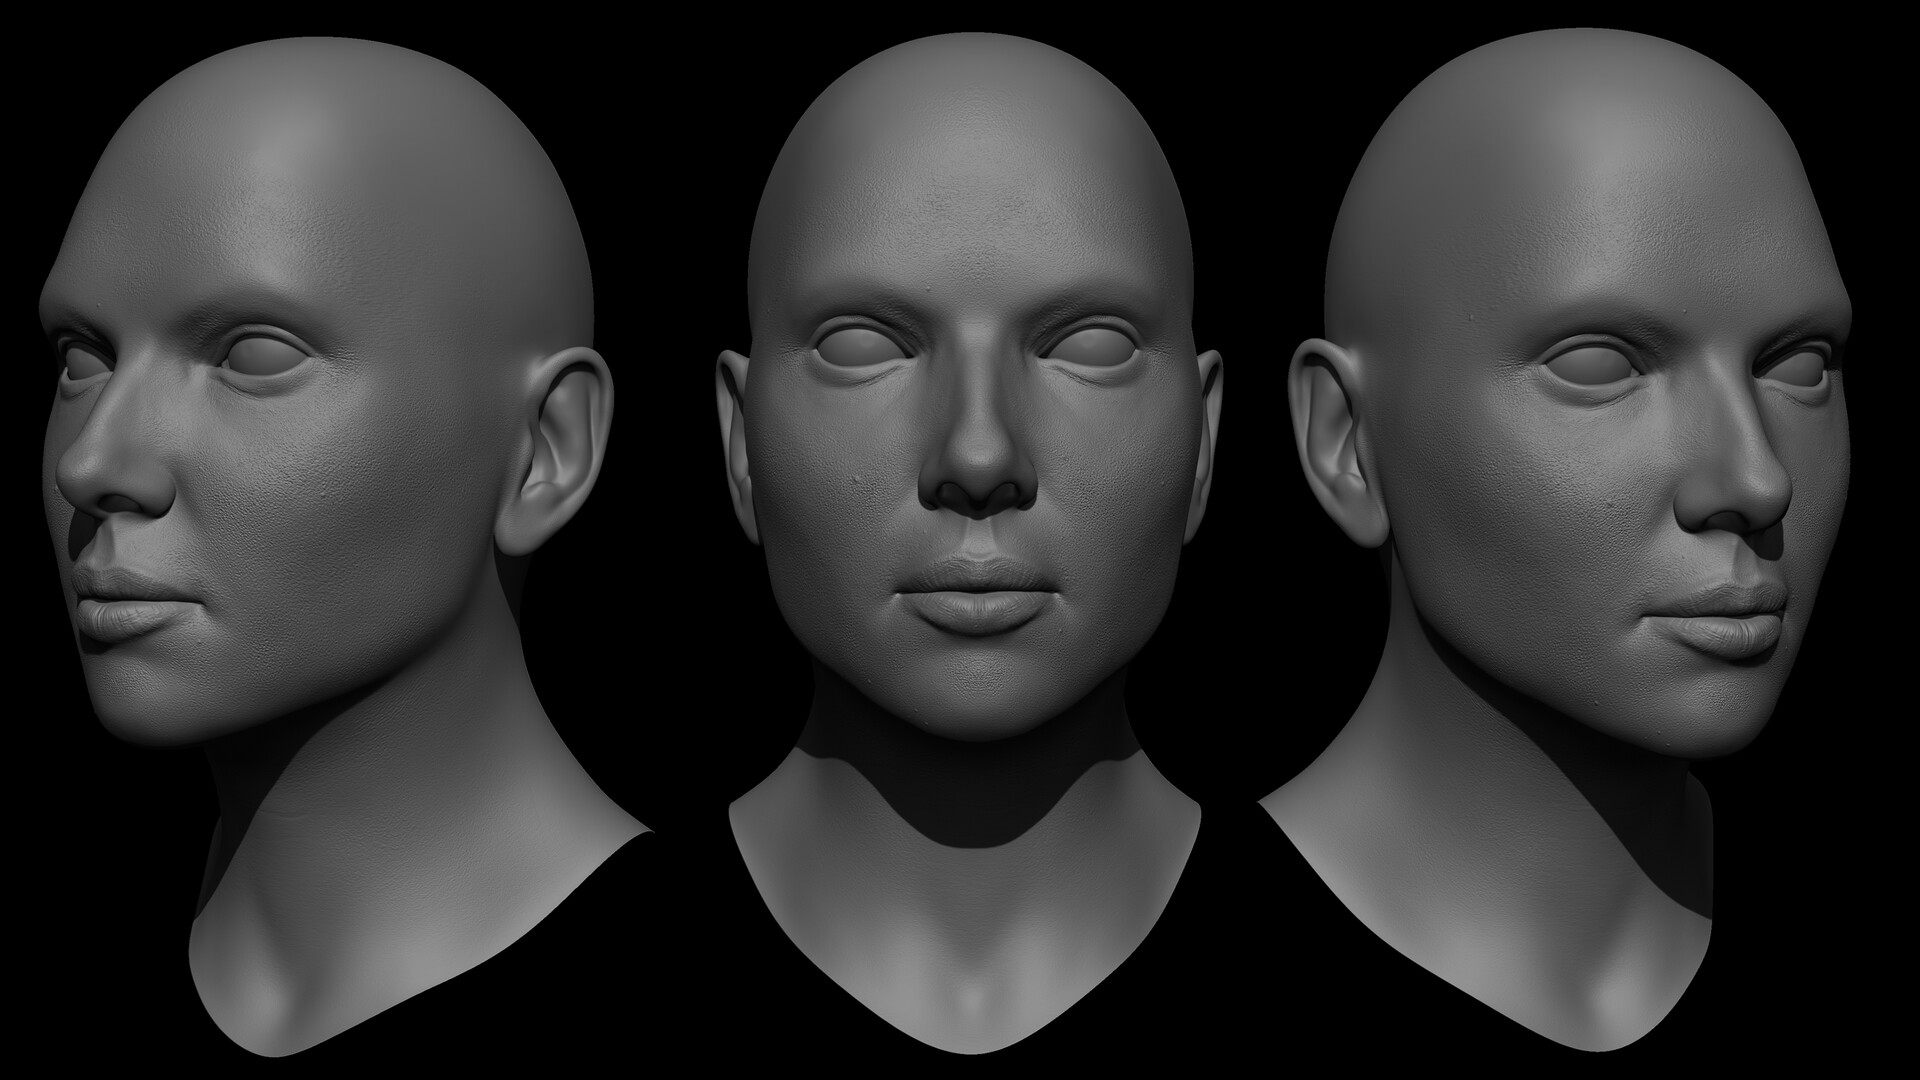 female face reference front and side